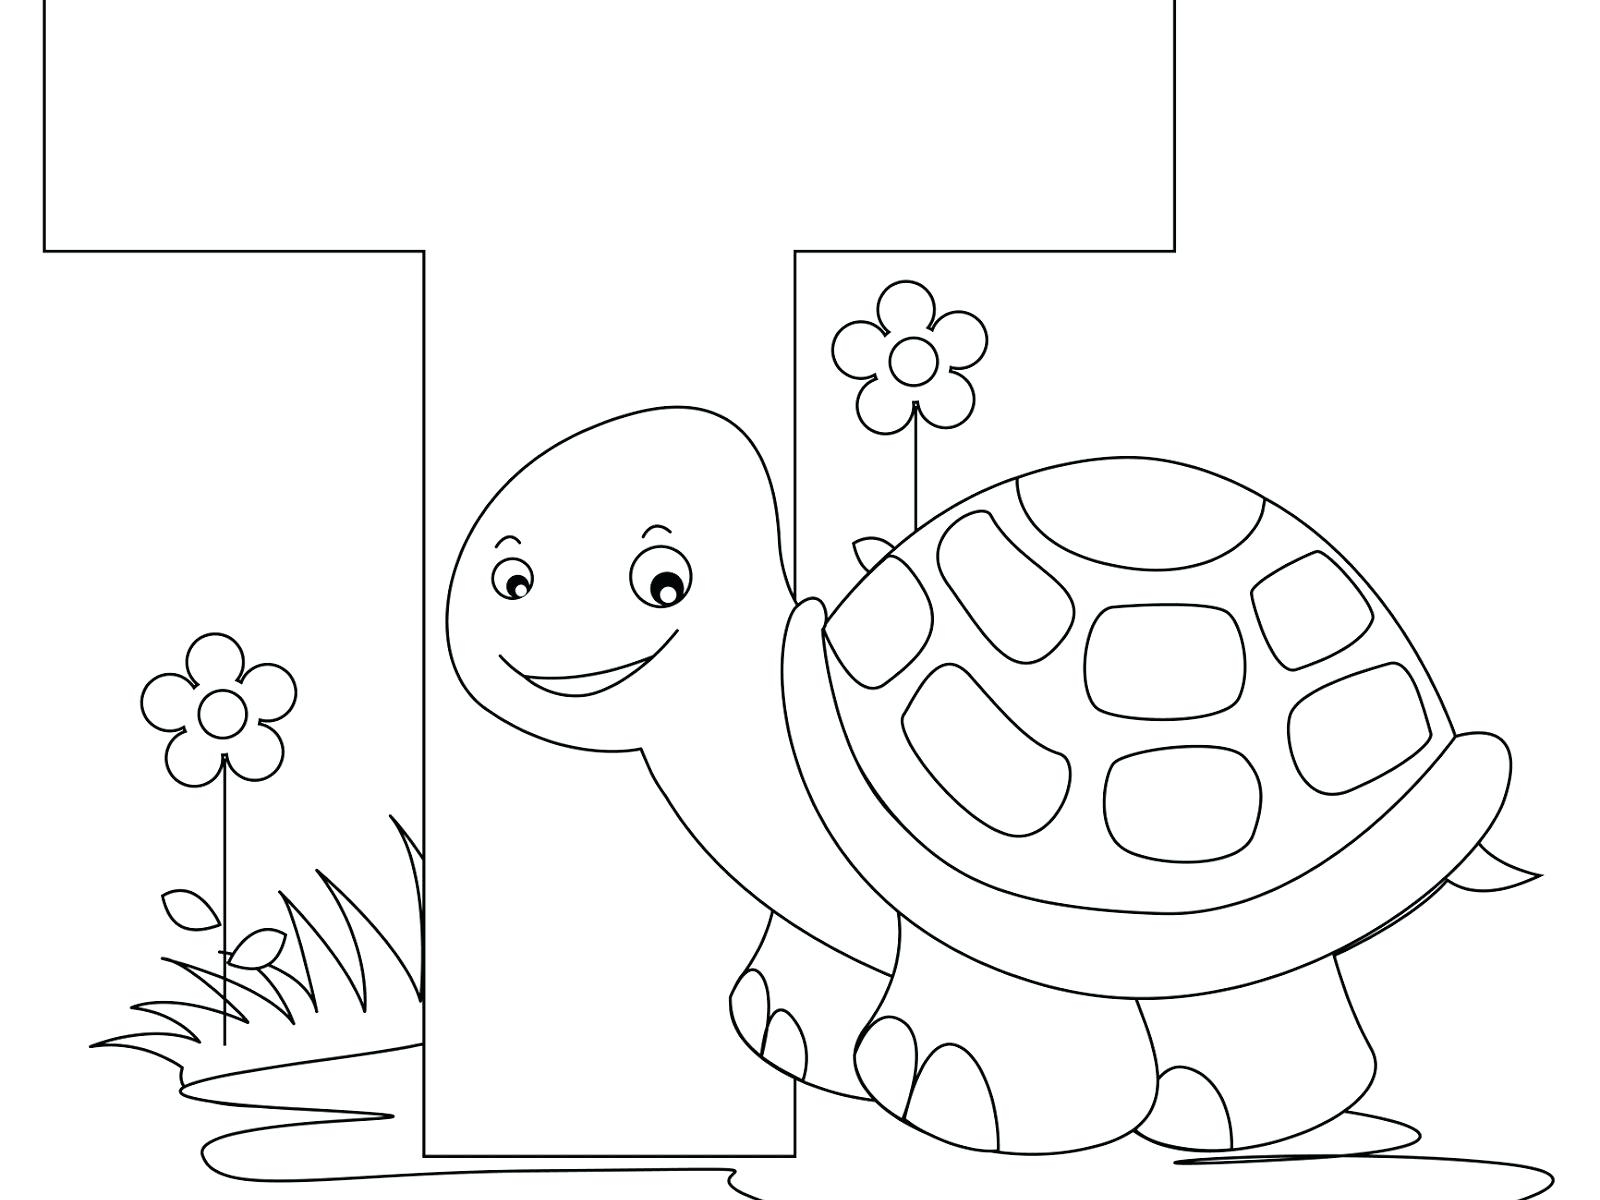 Alphabet Coloring Pages E At Getcolorings.com | Free Printable